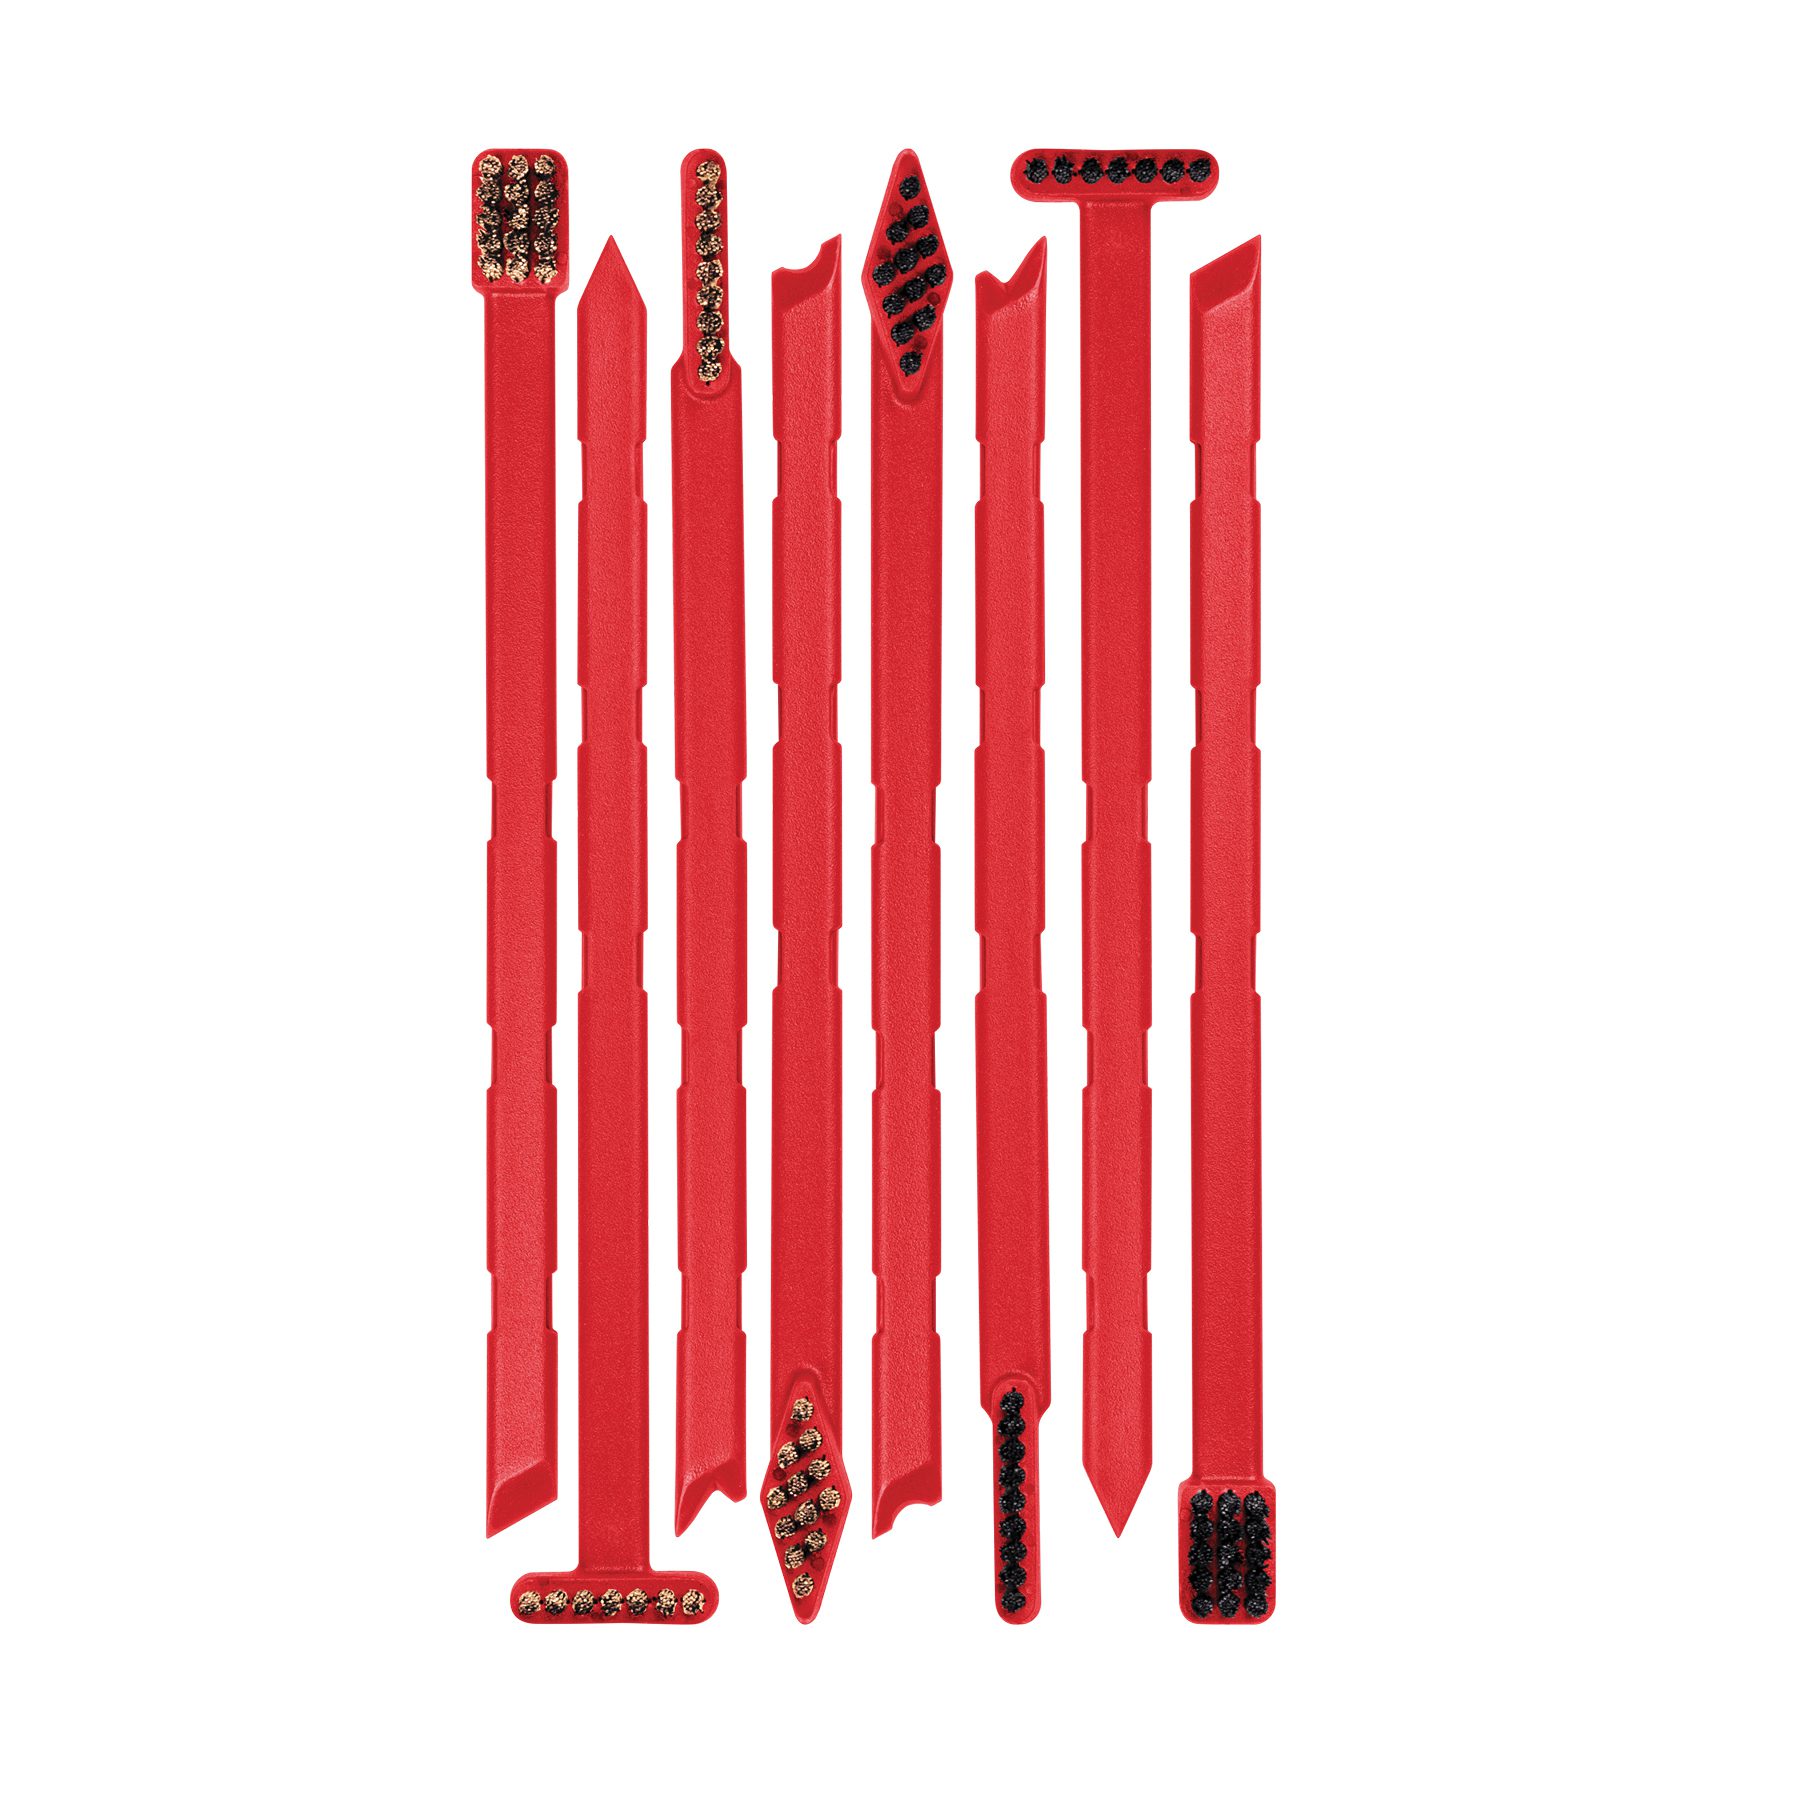 a group of red plastic tools on a white background